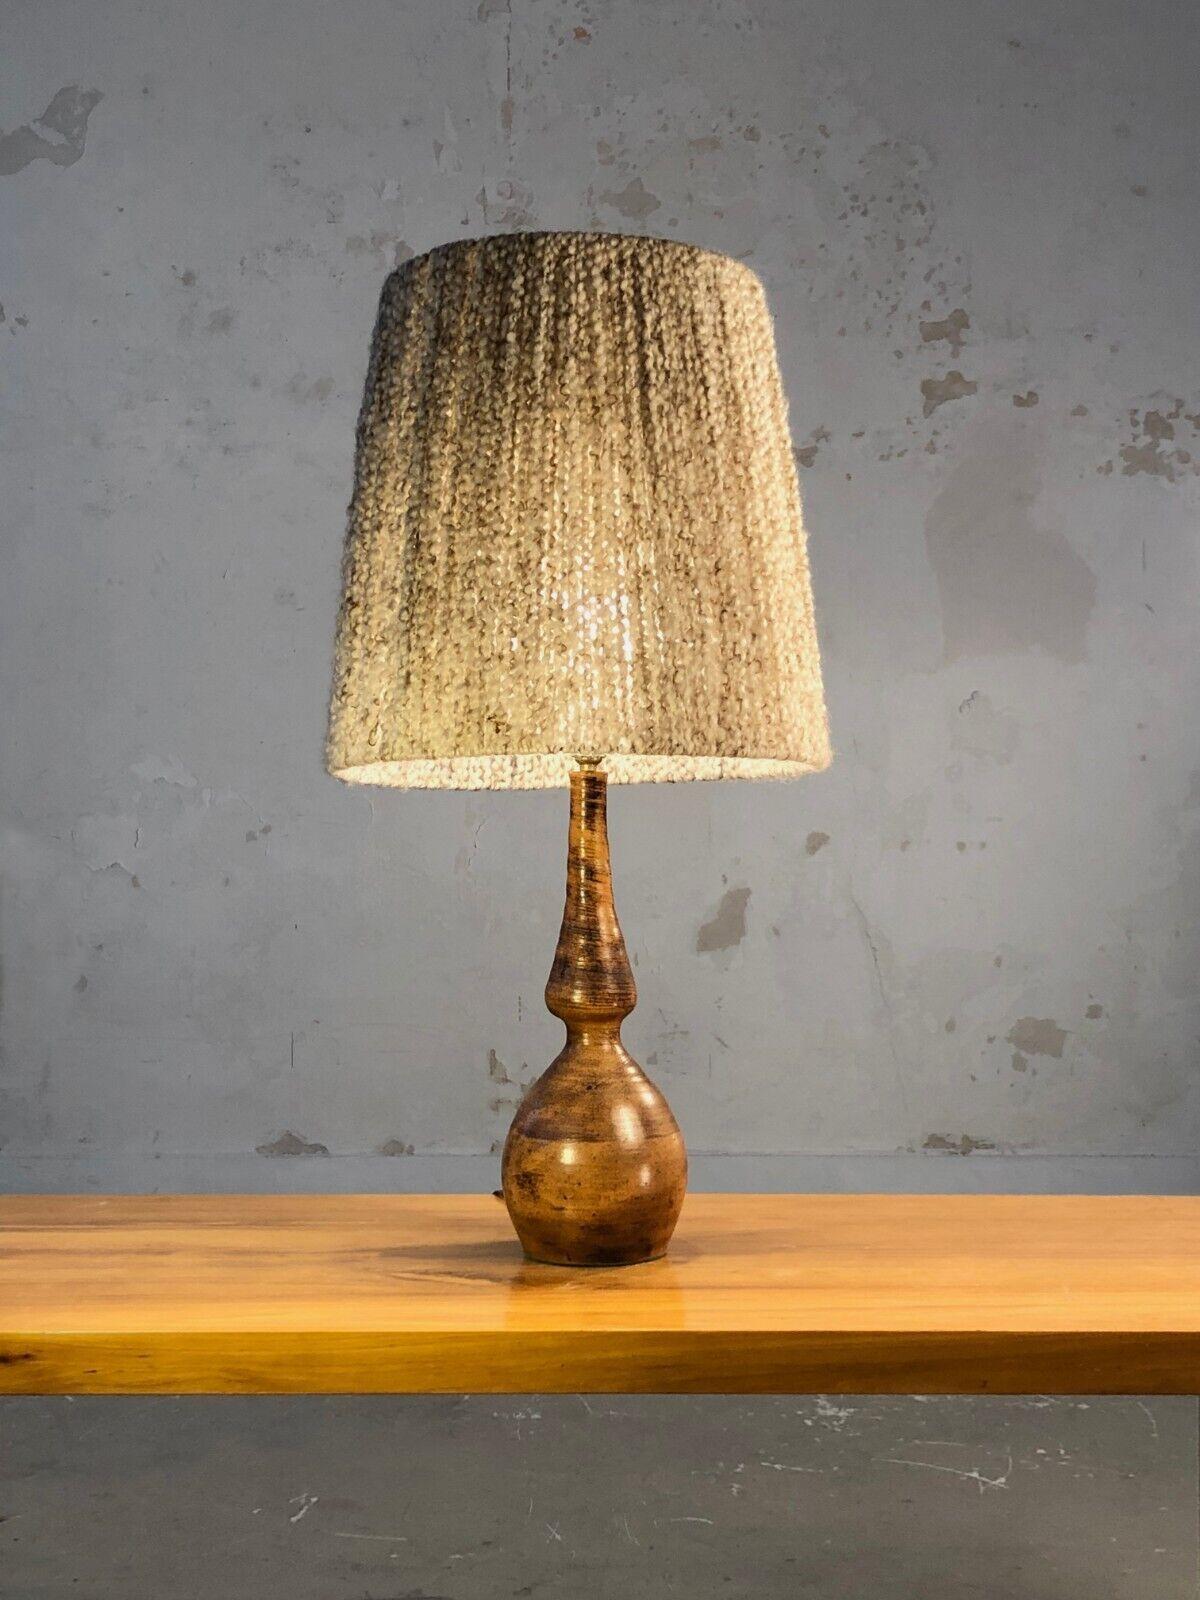 A spectacular and sensual table lamp, Post-Modernist, Brutalist, Popular Art, Shabby-Chic, Rustic Modern, with a Free-Form body in thick orange enameled ceramic with graphic decorations reminiscent of the compositions of Jacques Blin, unsigned, to